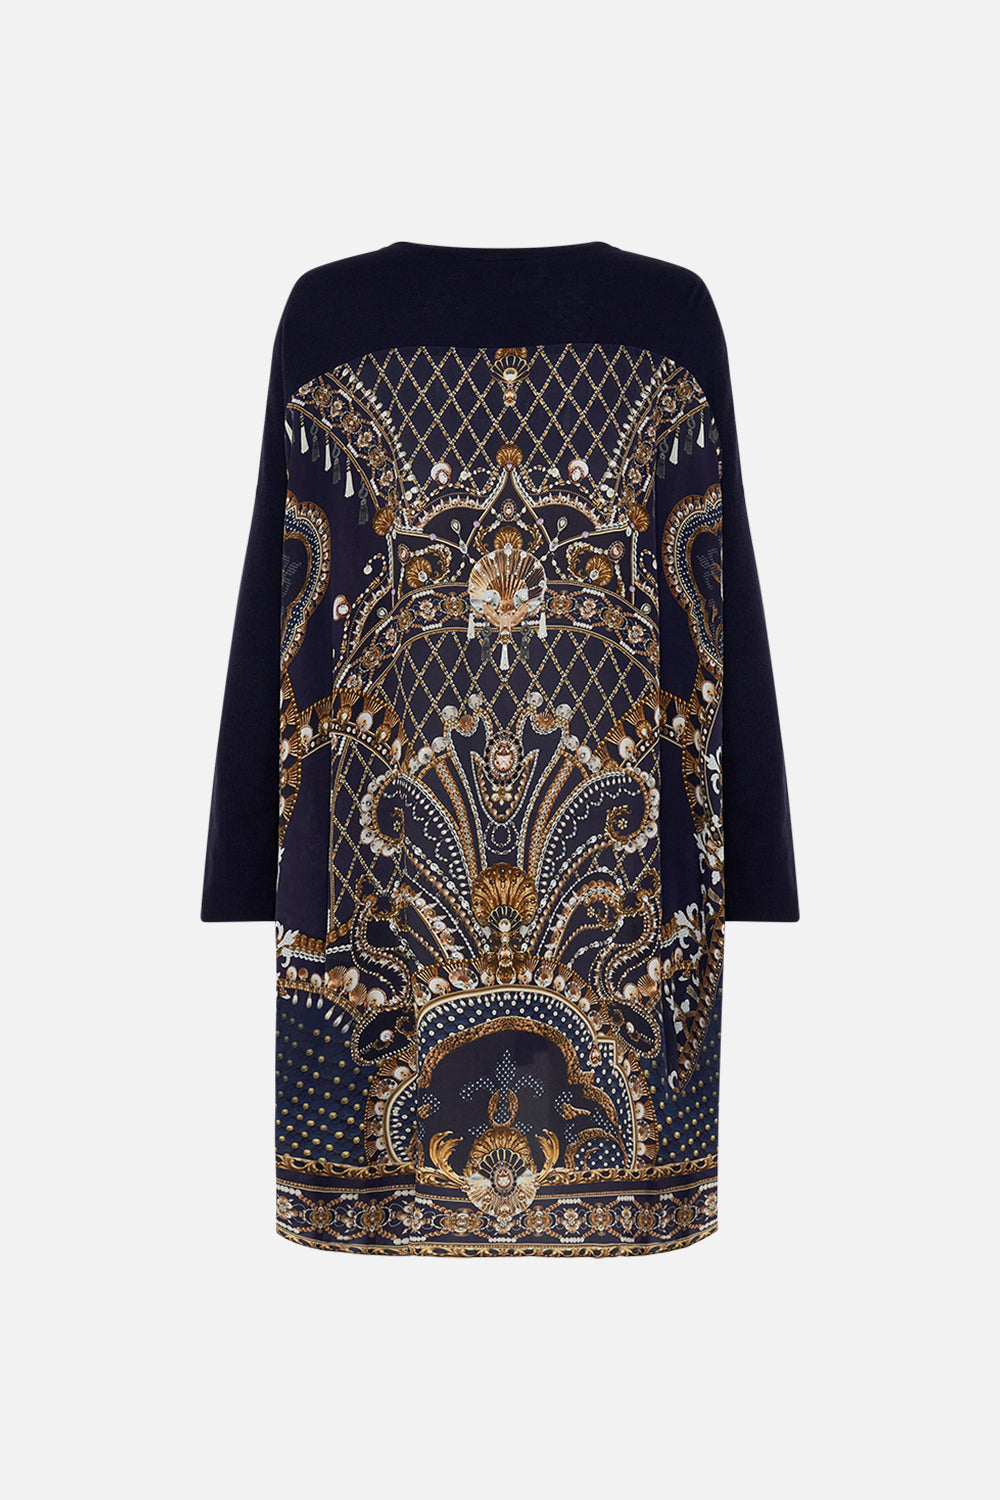 CAMILLA black/gold long sleeve jumper with print back in Dance With The Duke print.